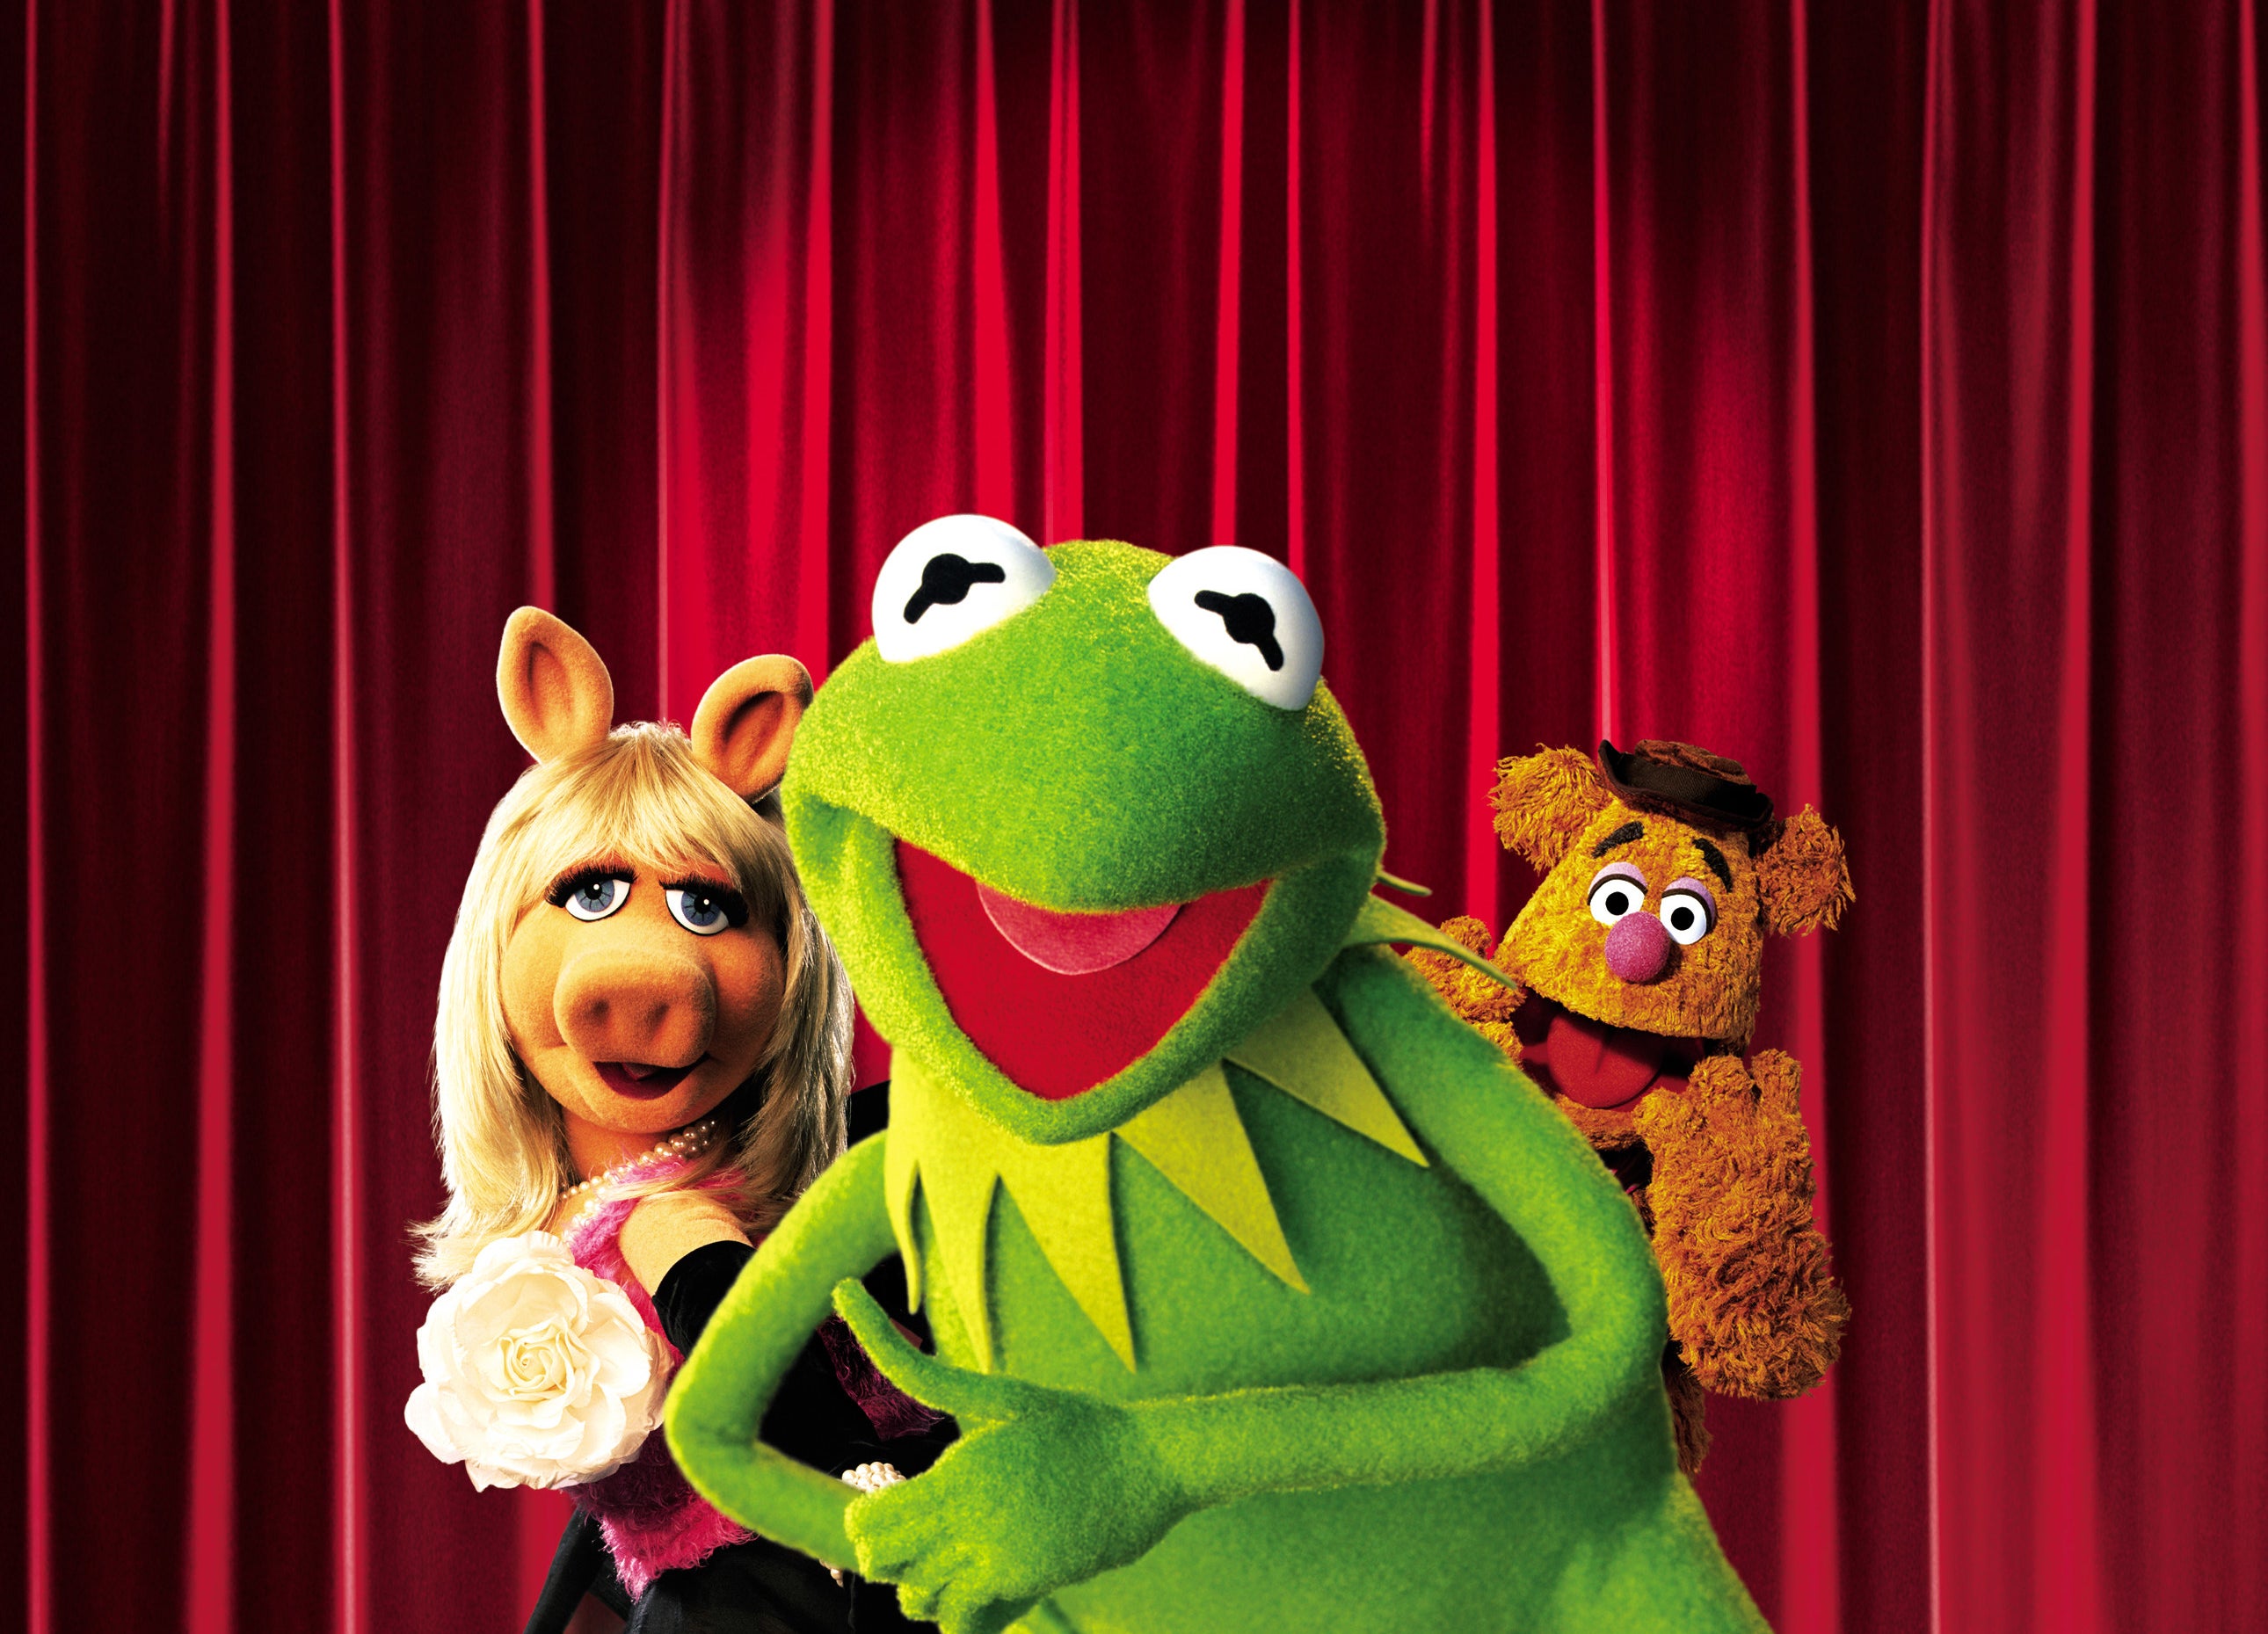 Kermit, Miss Piggy, and Fozzie Bear in front of a curtain